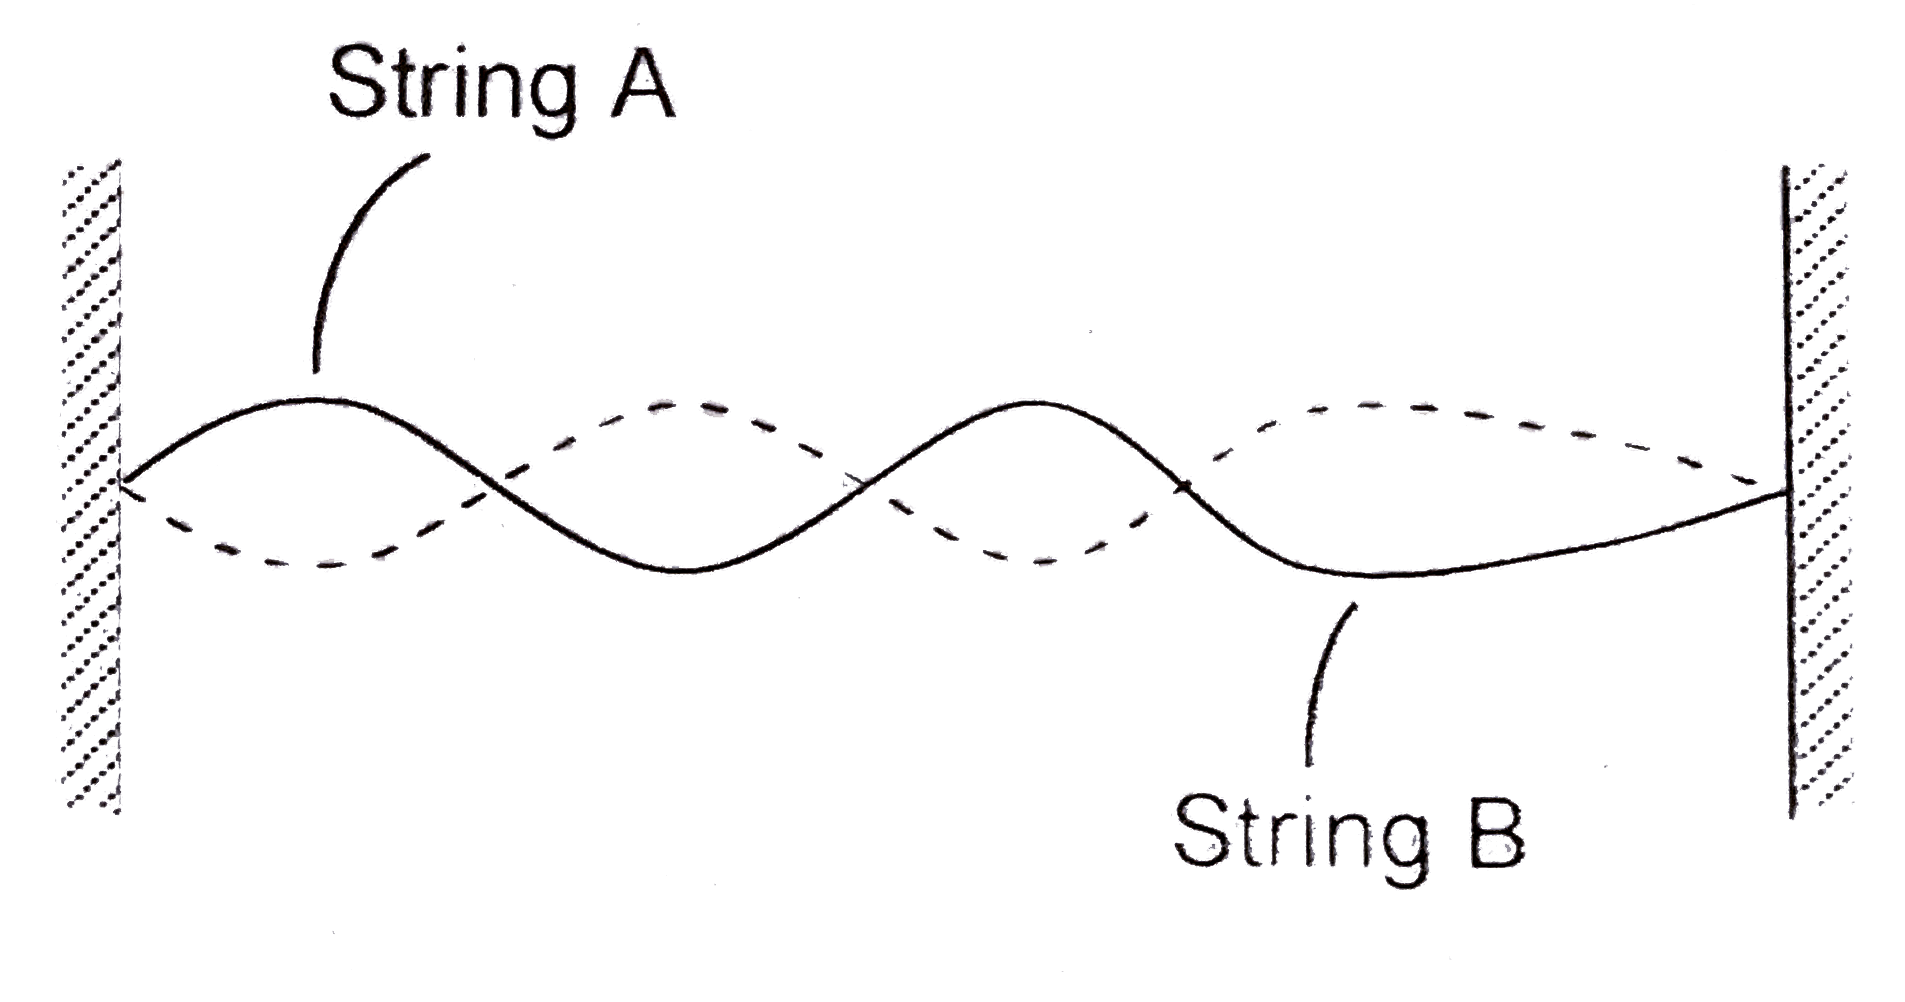 Two strings A and B of equal lenth but un equal linear mass density are tied together with a knot and stretched between two supports. A particular frquency happens to produce a standing wave on each part, with node at the knot as shown. If linear mass density of the two strings A and B are mu(1) and mu(2) respectively, then